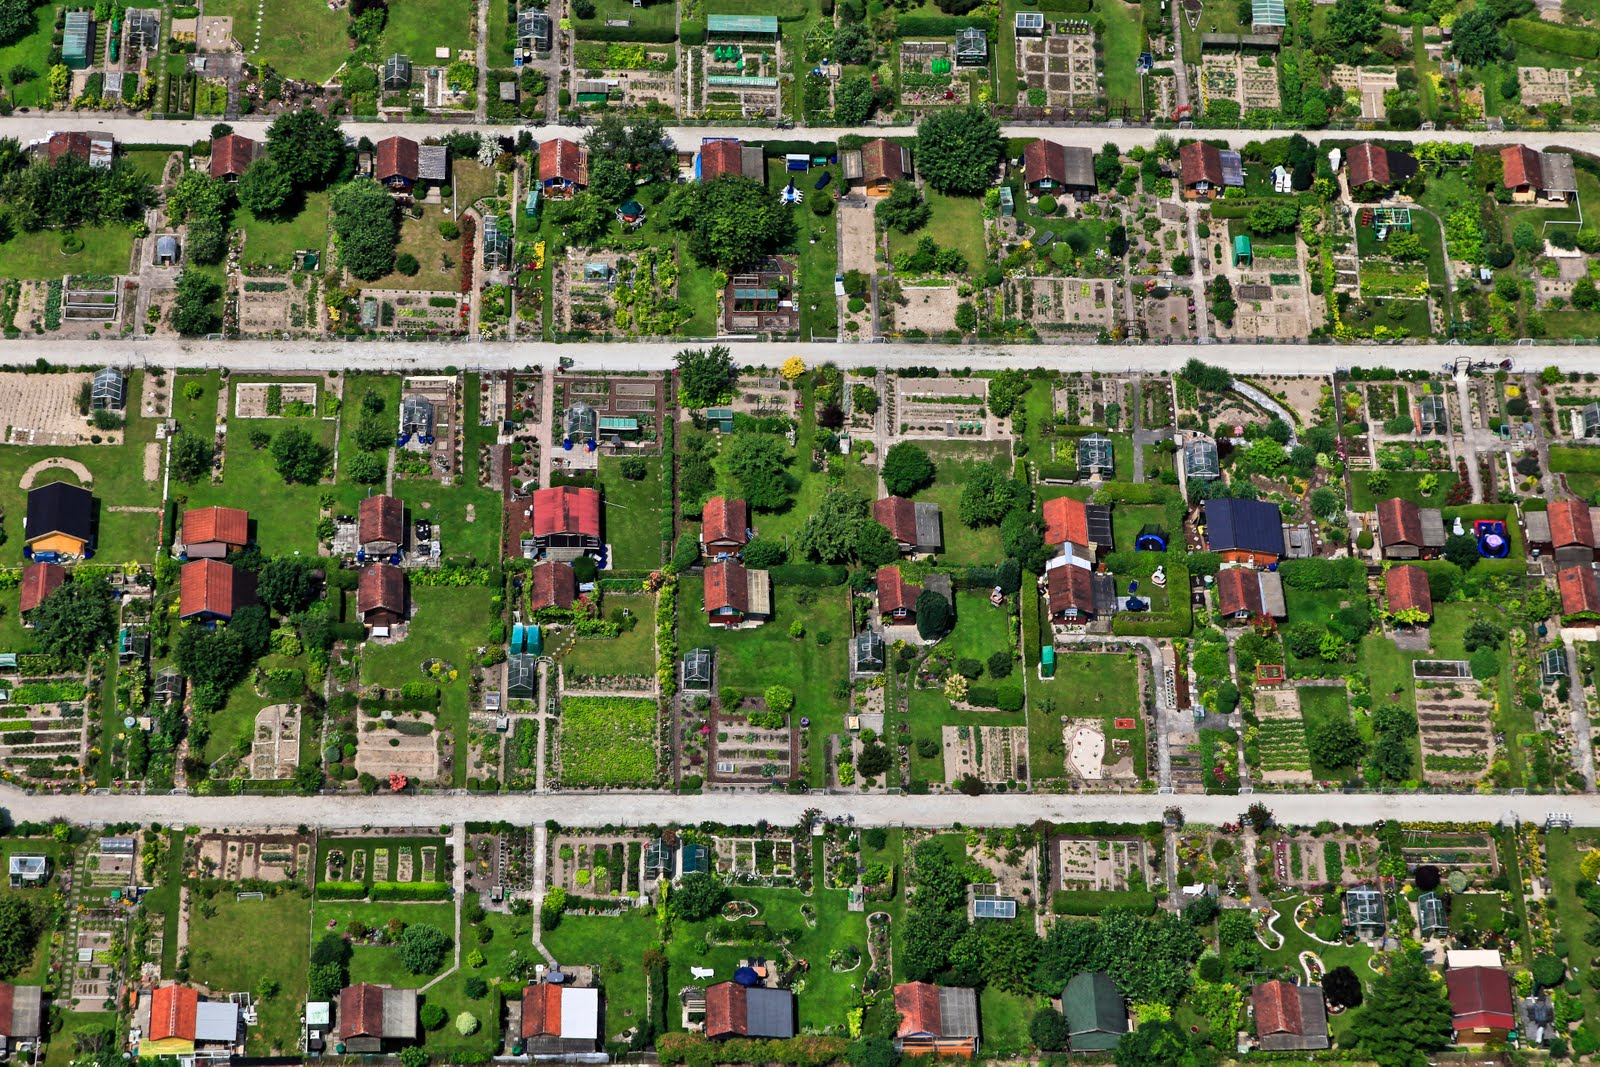 General 1600x1067 Germany garden house trees street aerial view suburb neighborhood farm orchards